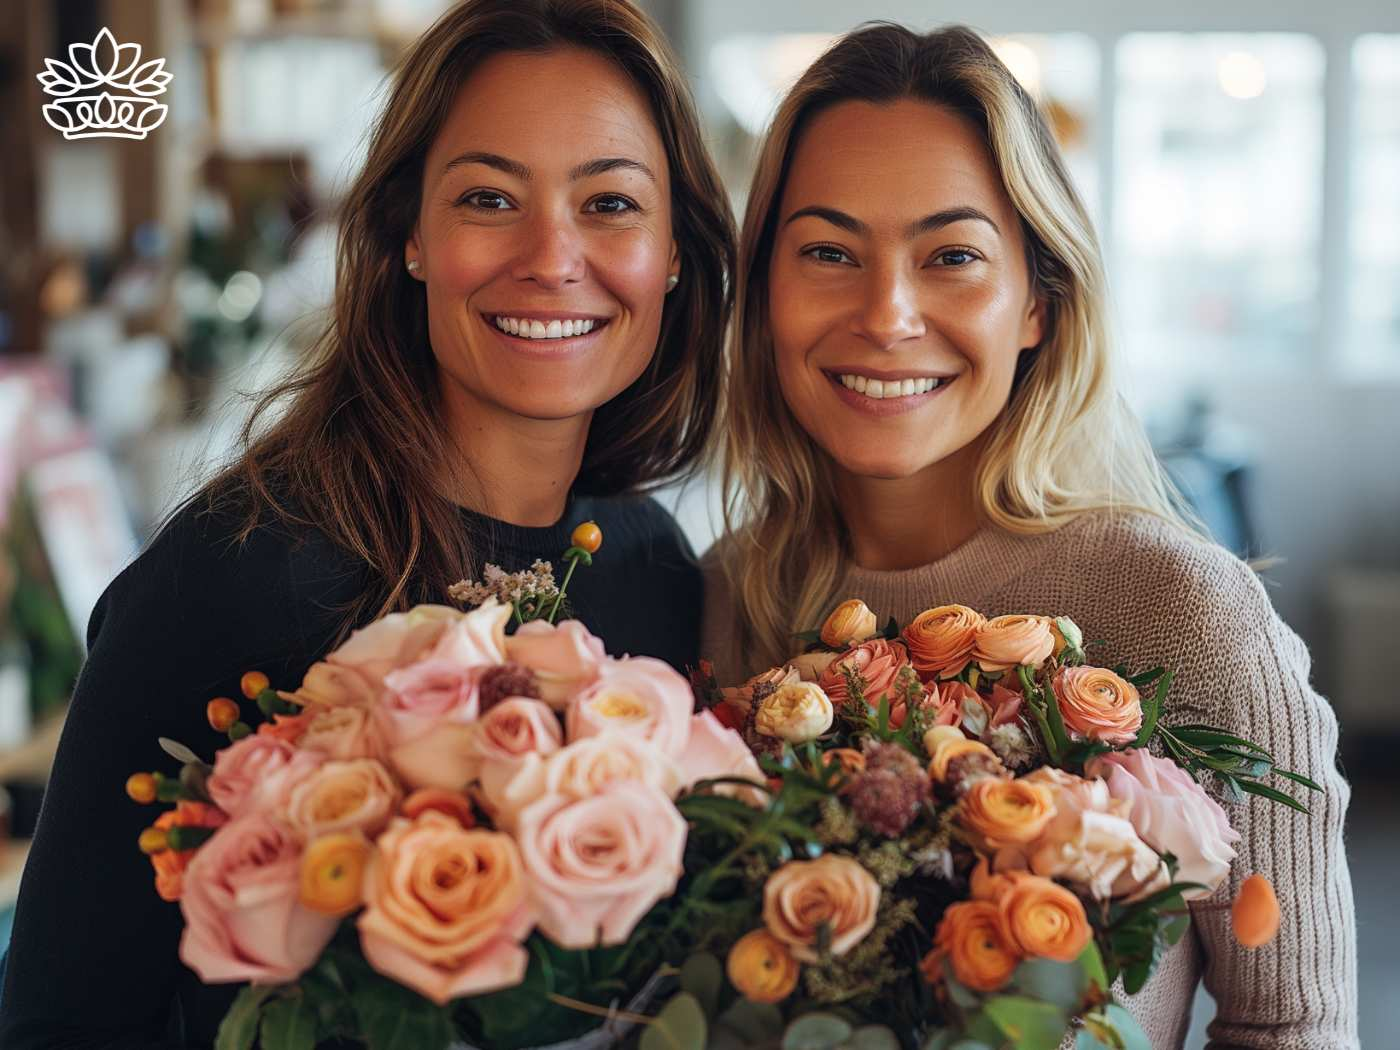 Two joyful women holding a stunning bouquet of peach and pink roses, celebrating a special moment with the Cape Town Gift Delivery Collection by Fabulous Flowers and Gifts. Order gift baskets, gift hampers and blooms for timely delivery and wonderful service.